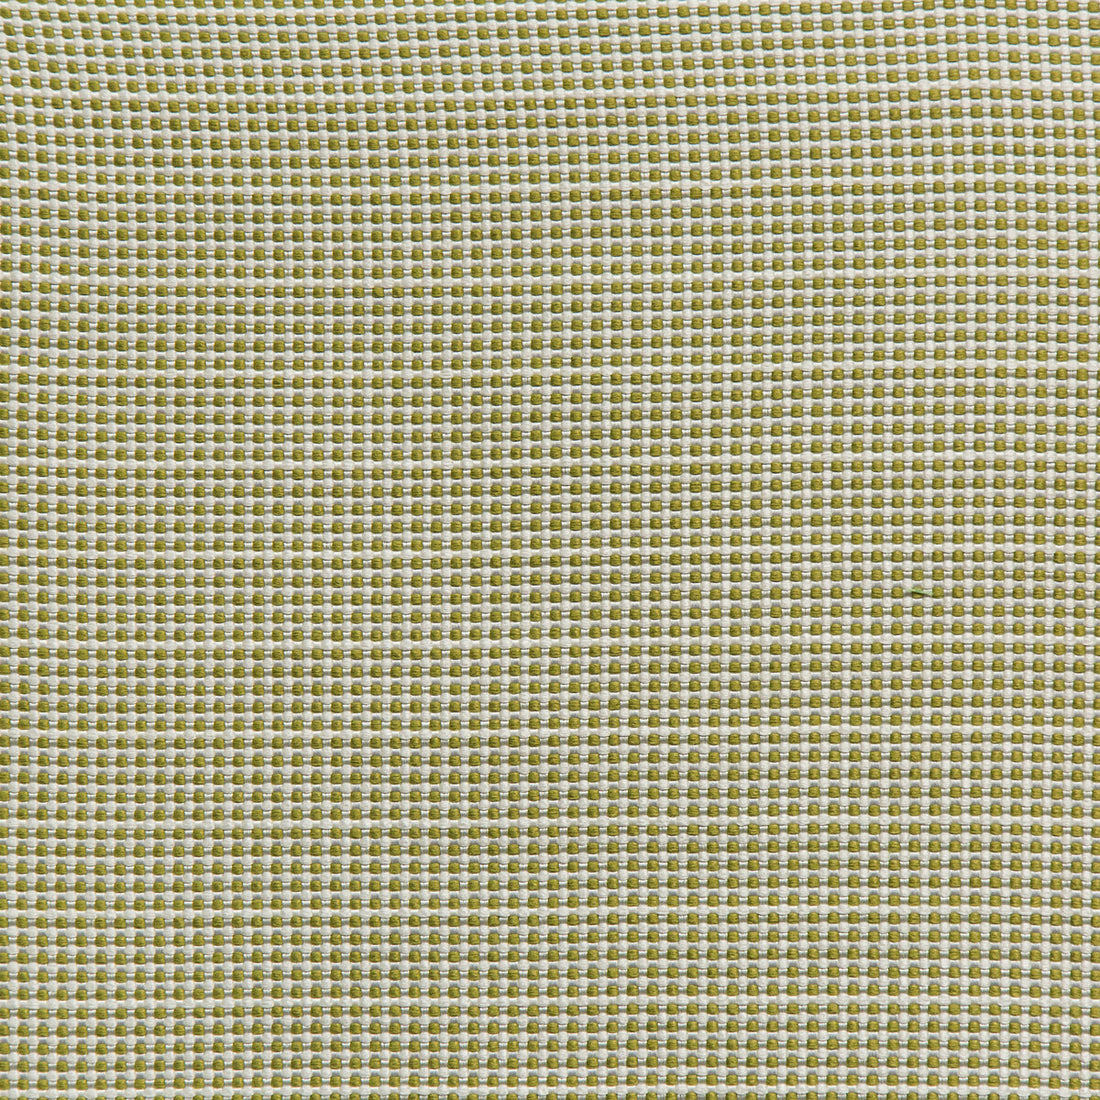 Portique fabric in palm green color - pattern 2019130.301.0 - by Lee Jofa